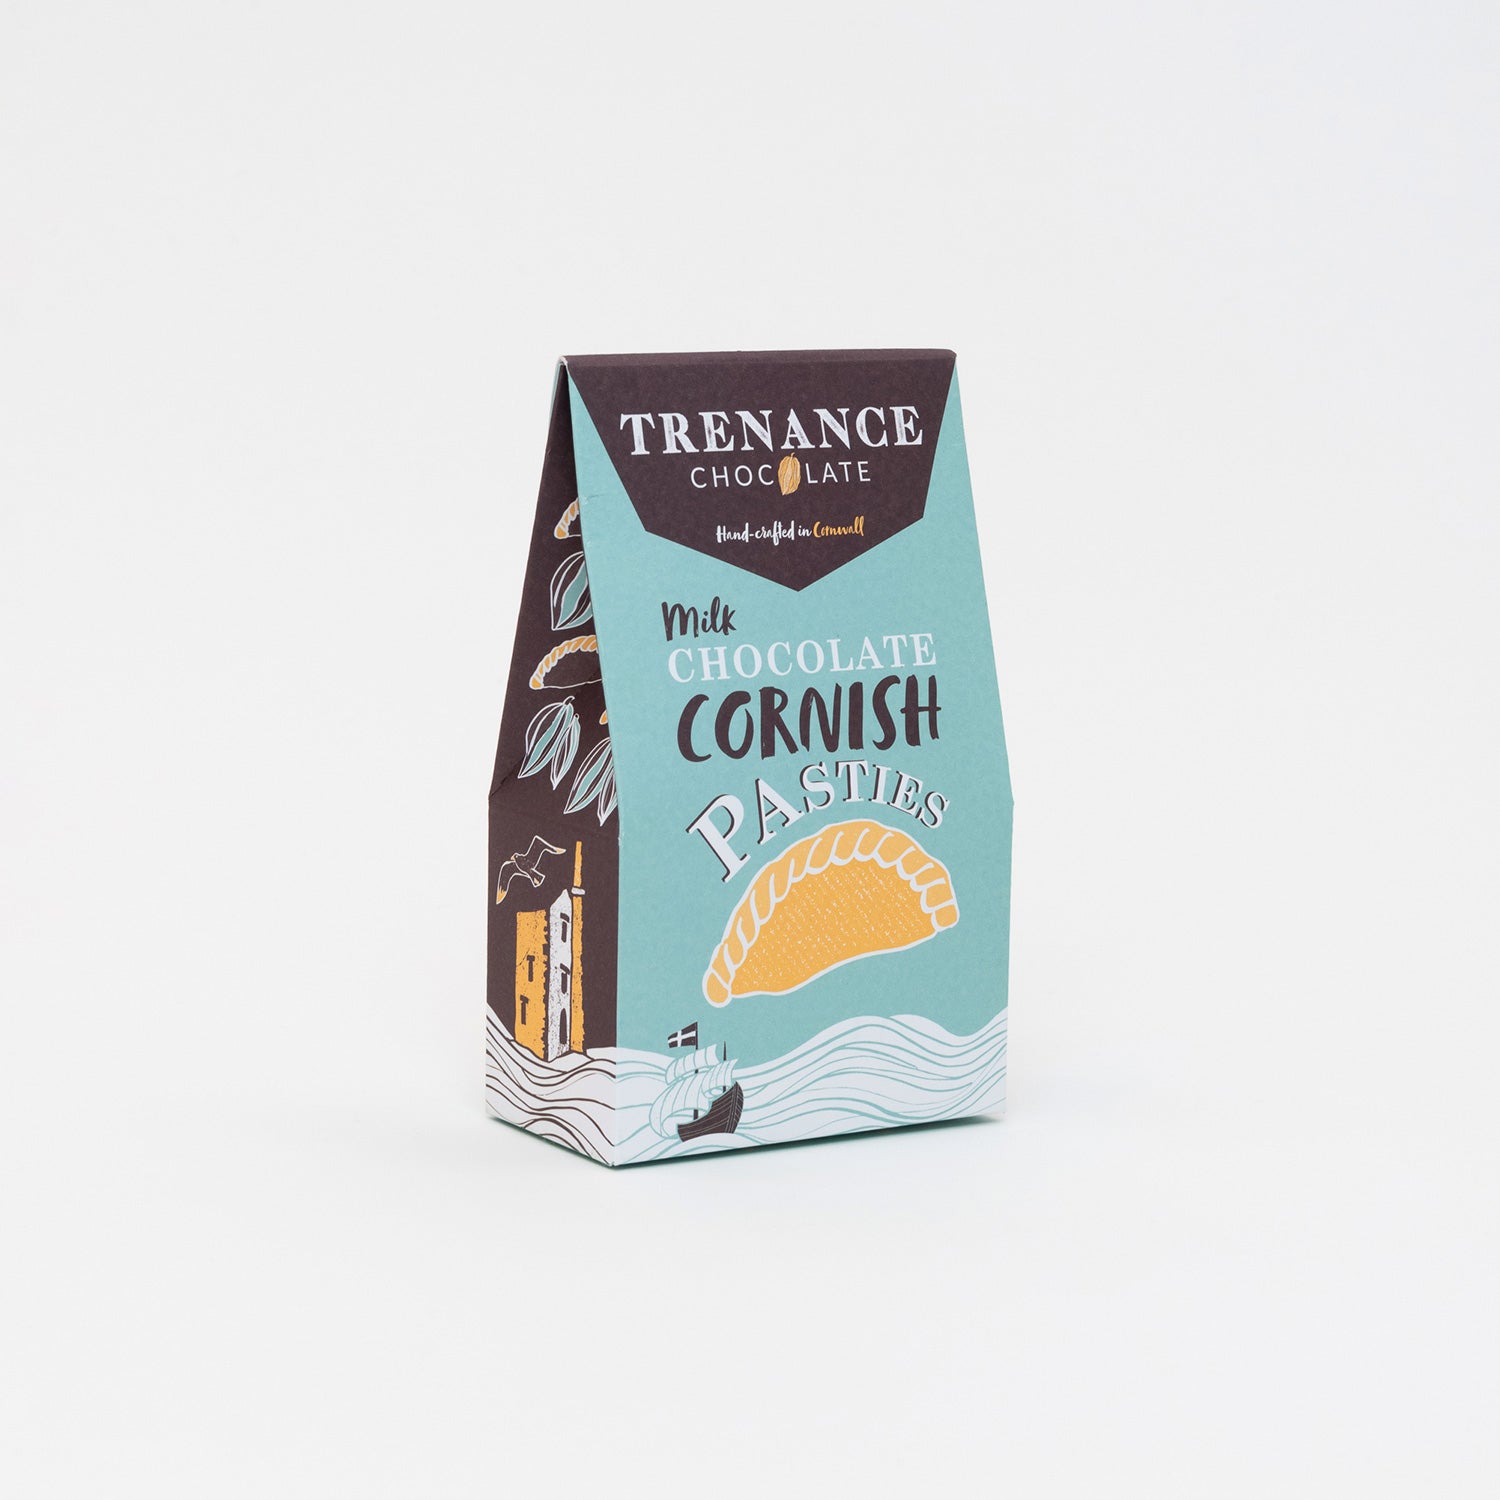 A pack of Milk Chocolate Cornish Pasties by Trenance Chocolate, pictured with a white background.